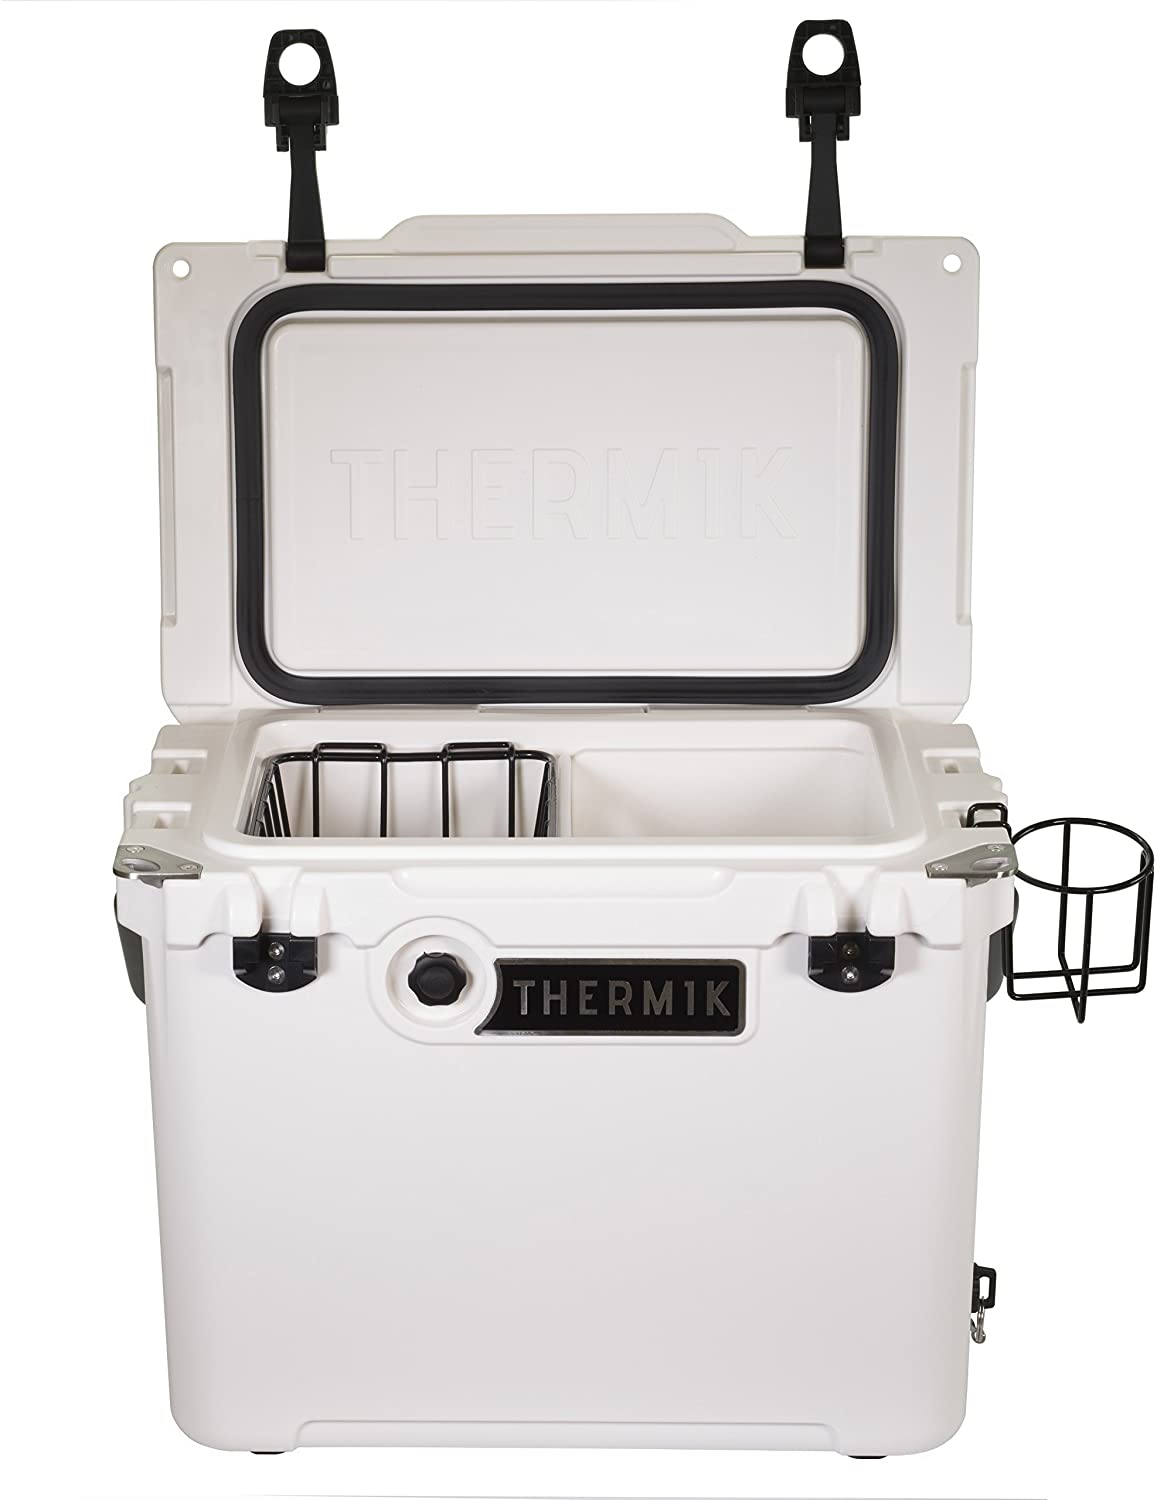 BEST ROTOMOLDED COOLER 2022 REVIEW: 3 - 5 Day Portable Ice Chest Cooler All In One Cooling Gear Lab: Any Refrigerators Air Conditioners Freezers Ice Makers Coolers Fans Reviewed And Compared.